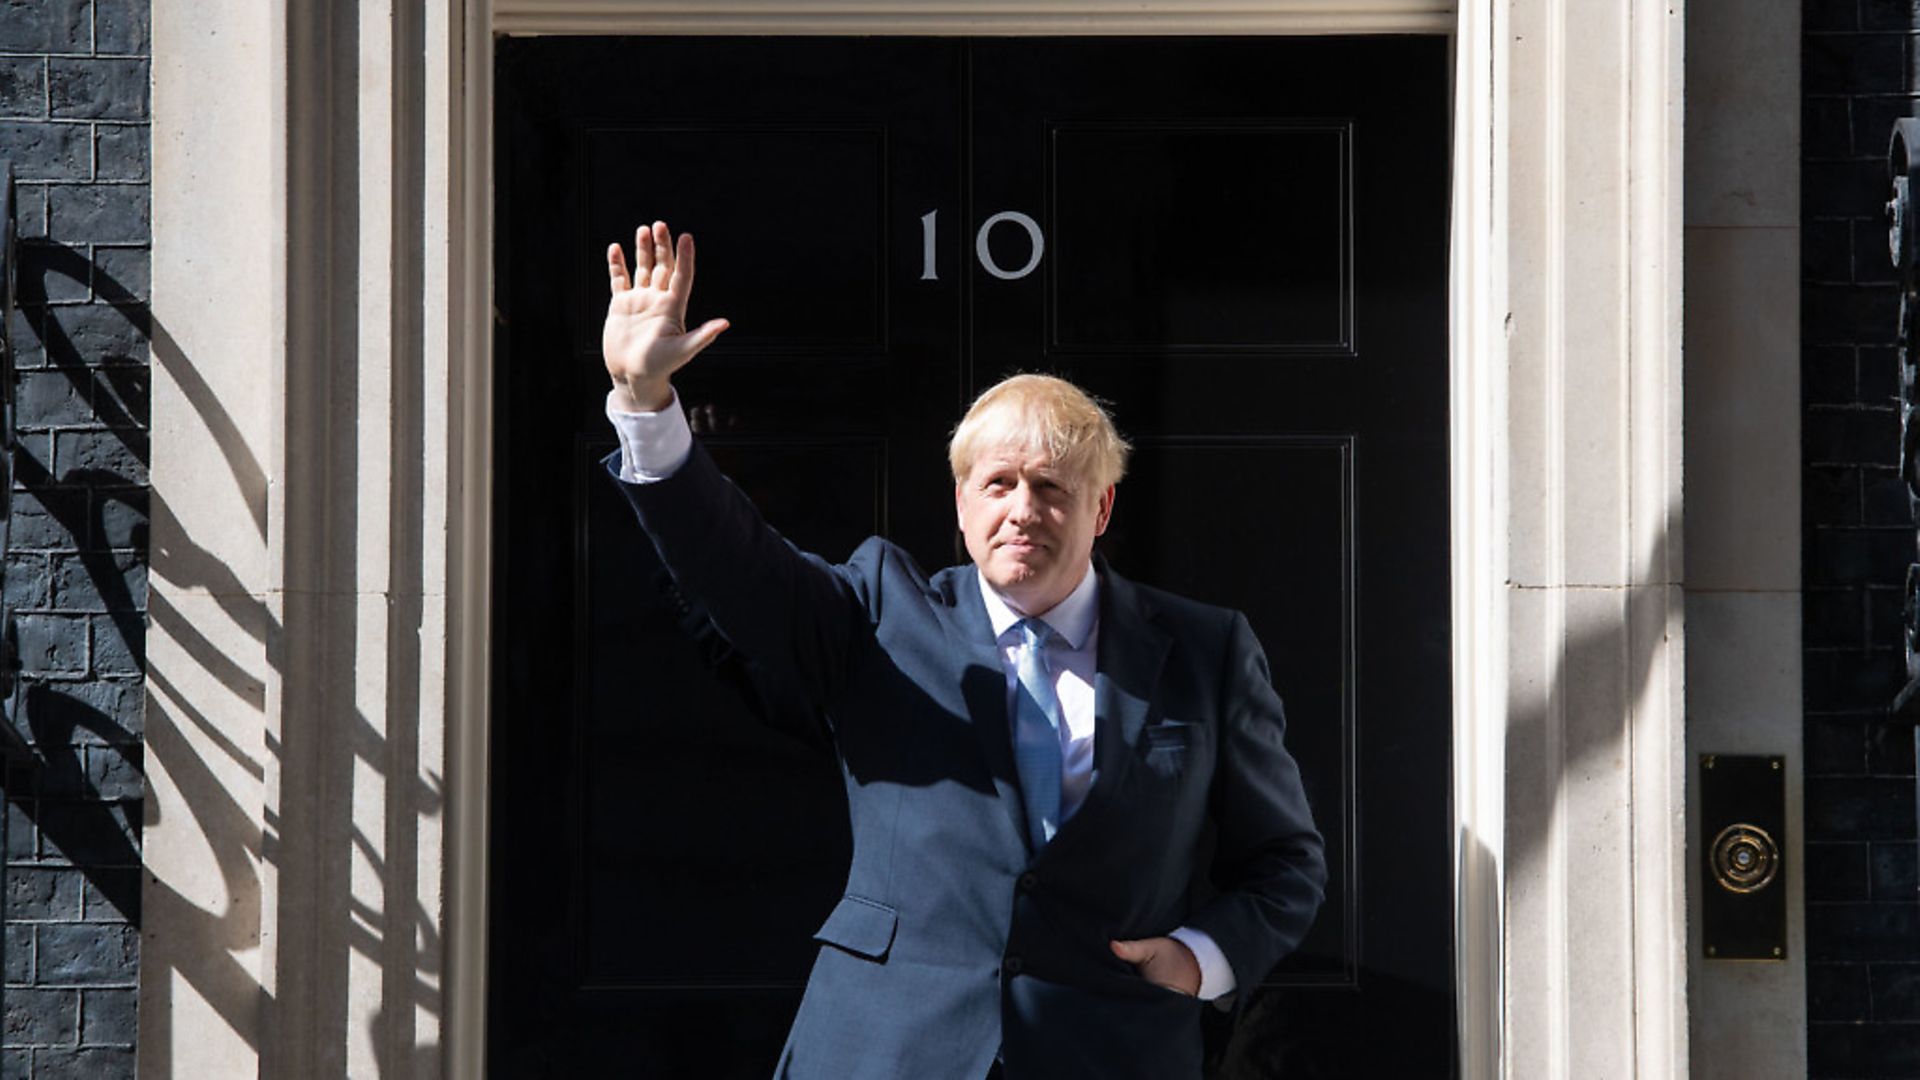 New Prime Minister Boris Johnson waves on the steps of 10 Downing Street, London, after meeting Queen Elizabeth II and accepting her invitation to become Prime Minister and form a new government. - Credit: PA Wire/PA Images